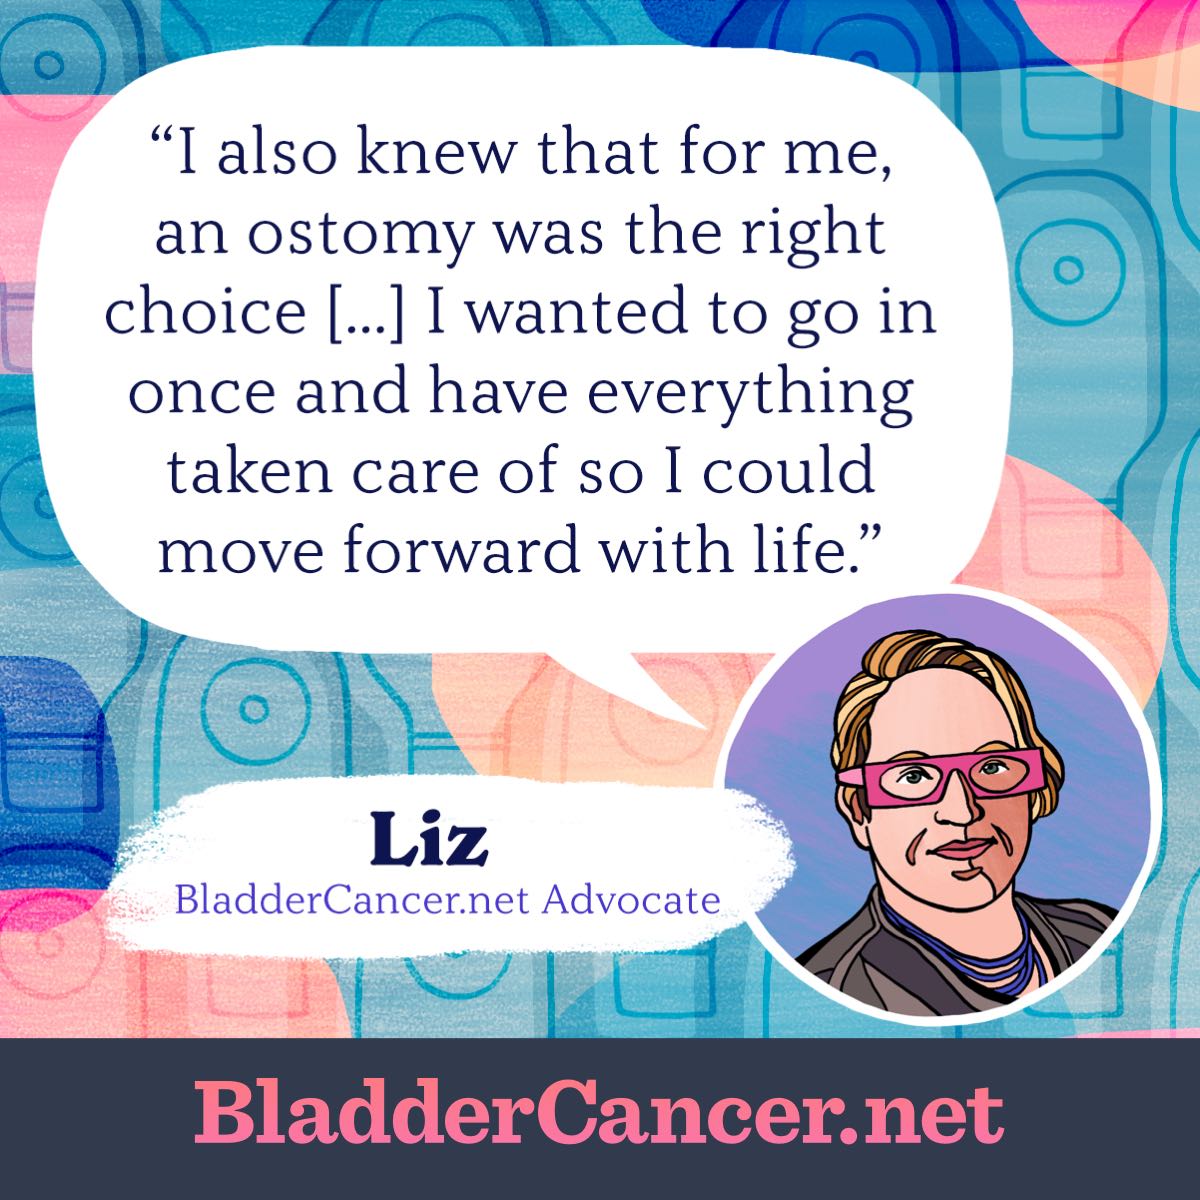 I also knew that for me, an ostomy was the right choice. I wanted to go in once and have everything taken care of so I could move forward with life. -Liz, BladderCancer.net Advocate